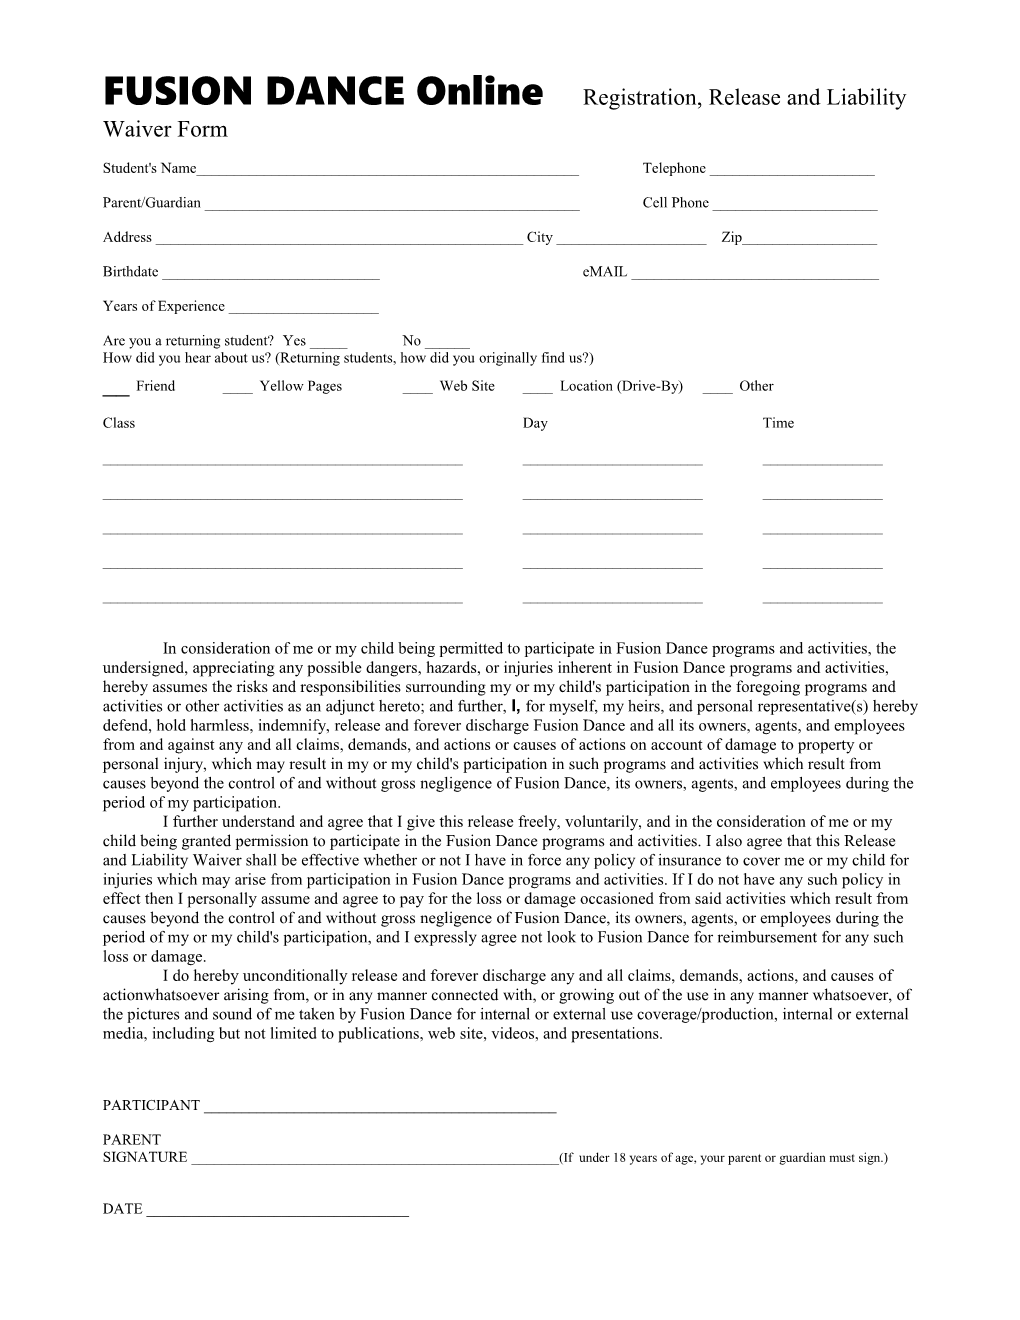 FUSION DANCE Online Registration, Release and Liability Waiver Form